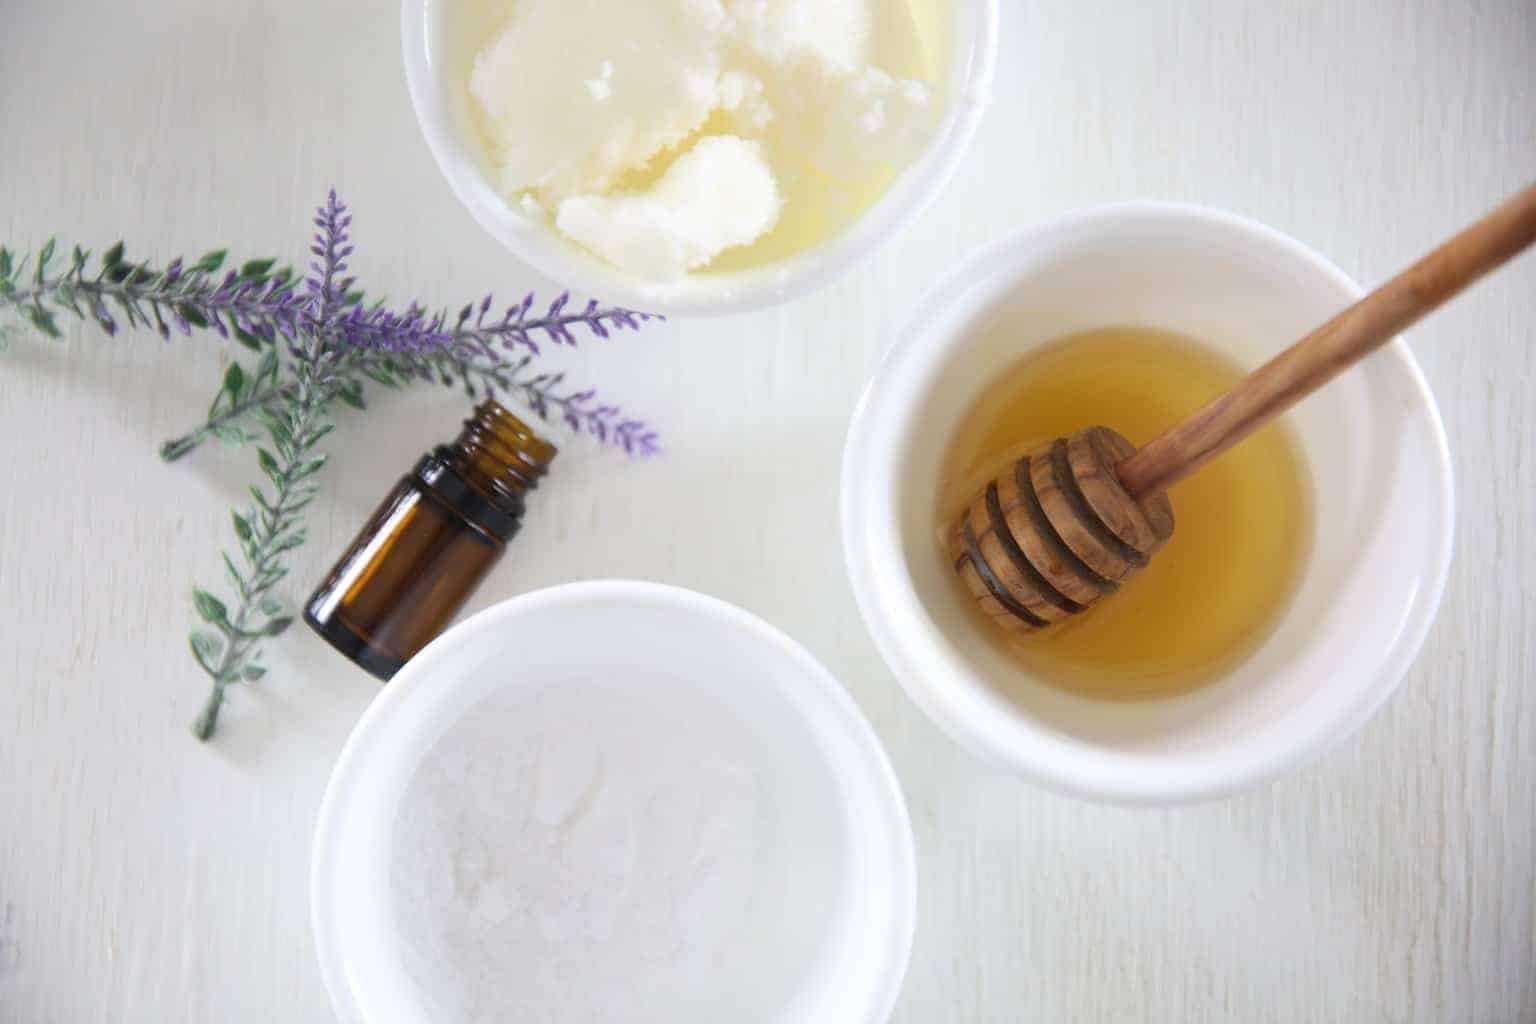 Beef tallow and honey in separate white bowls on white table with essential oil bottle and lavender leaves.